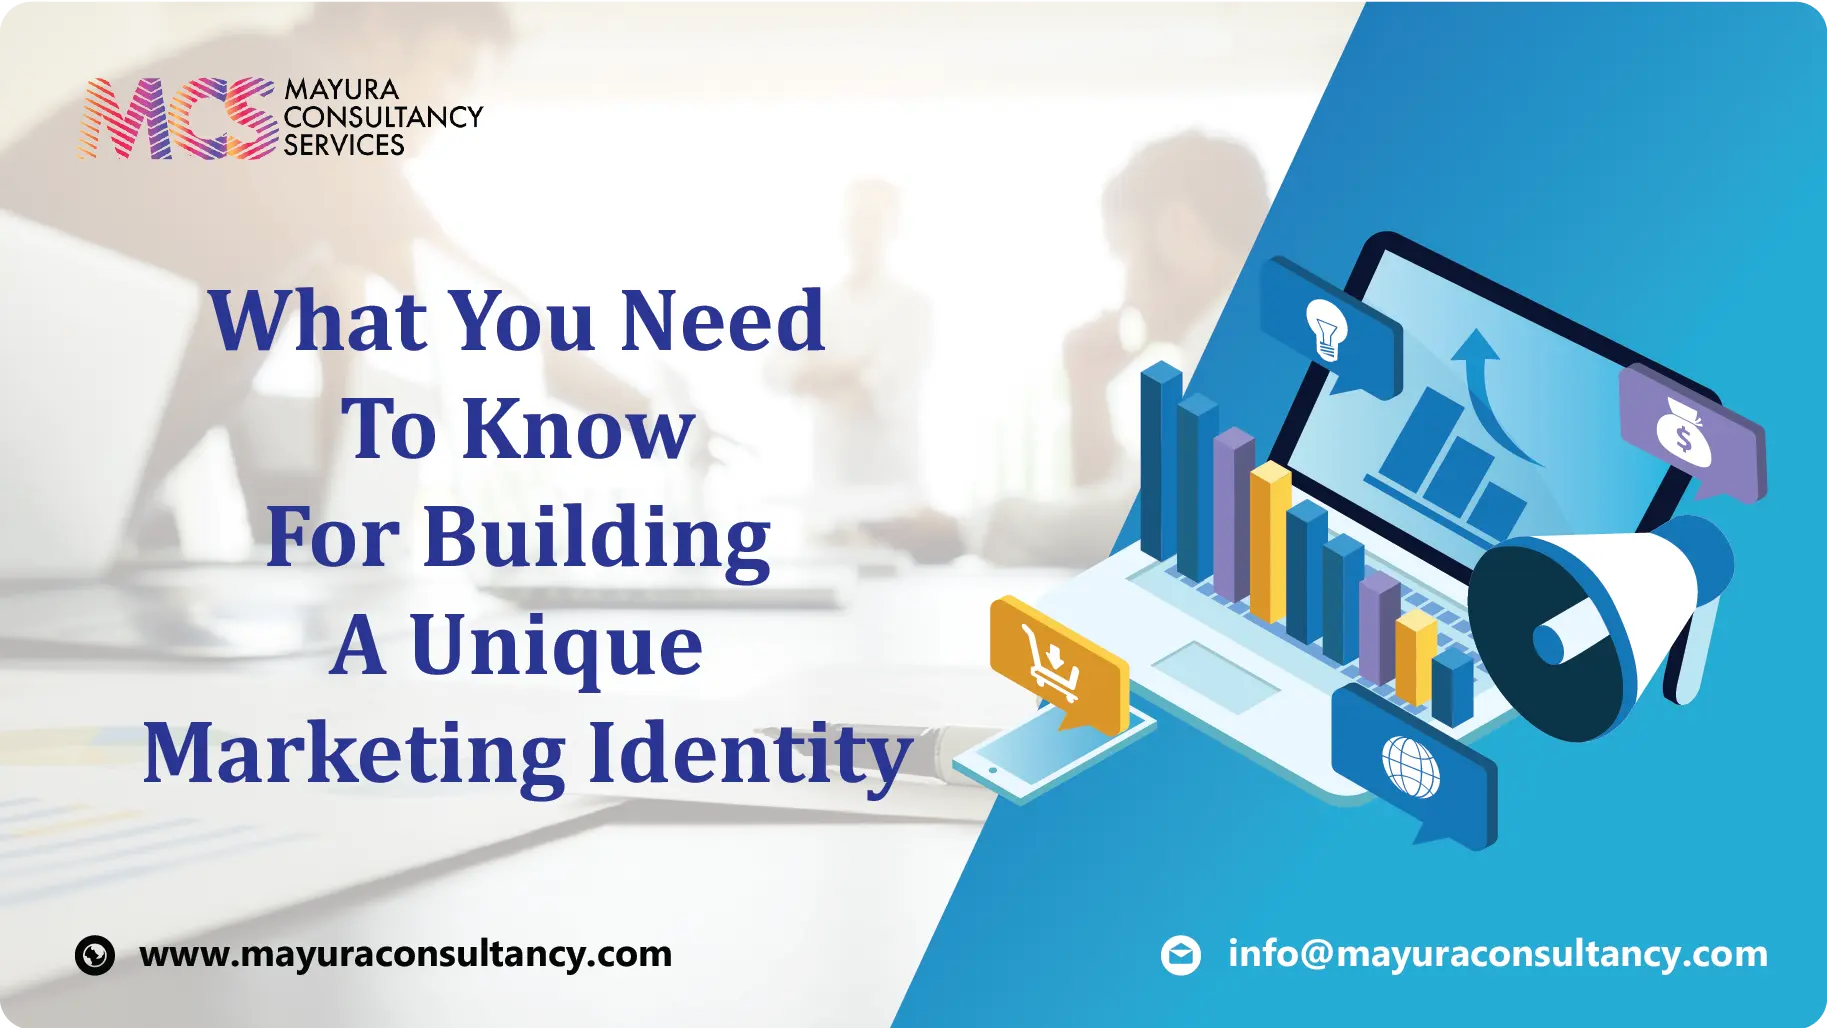 What You Need to Know For Building a Unique Marketing Identity